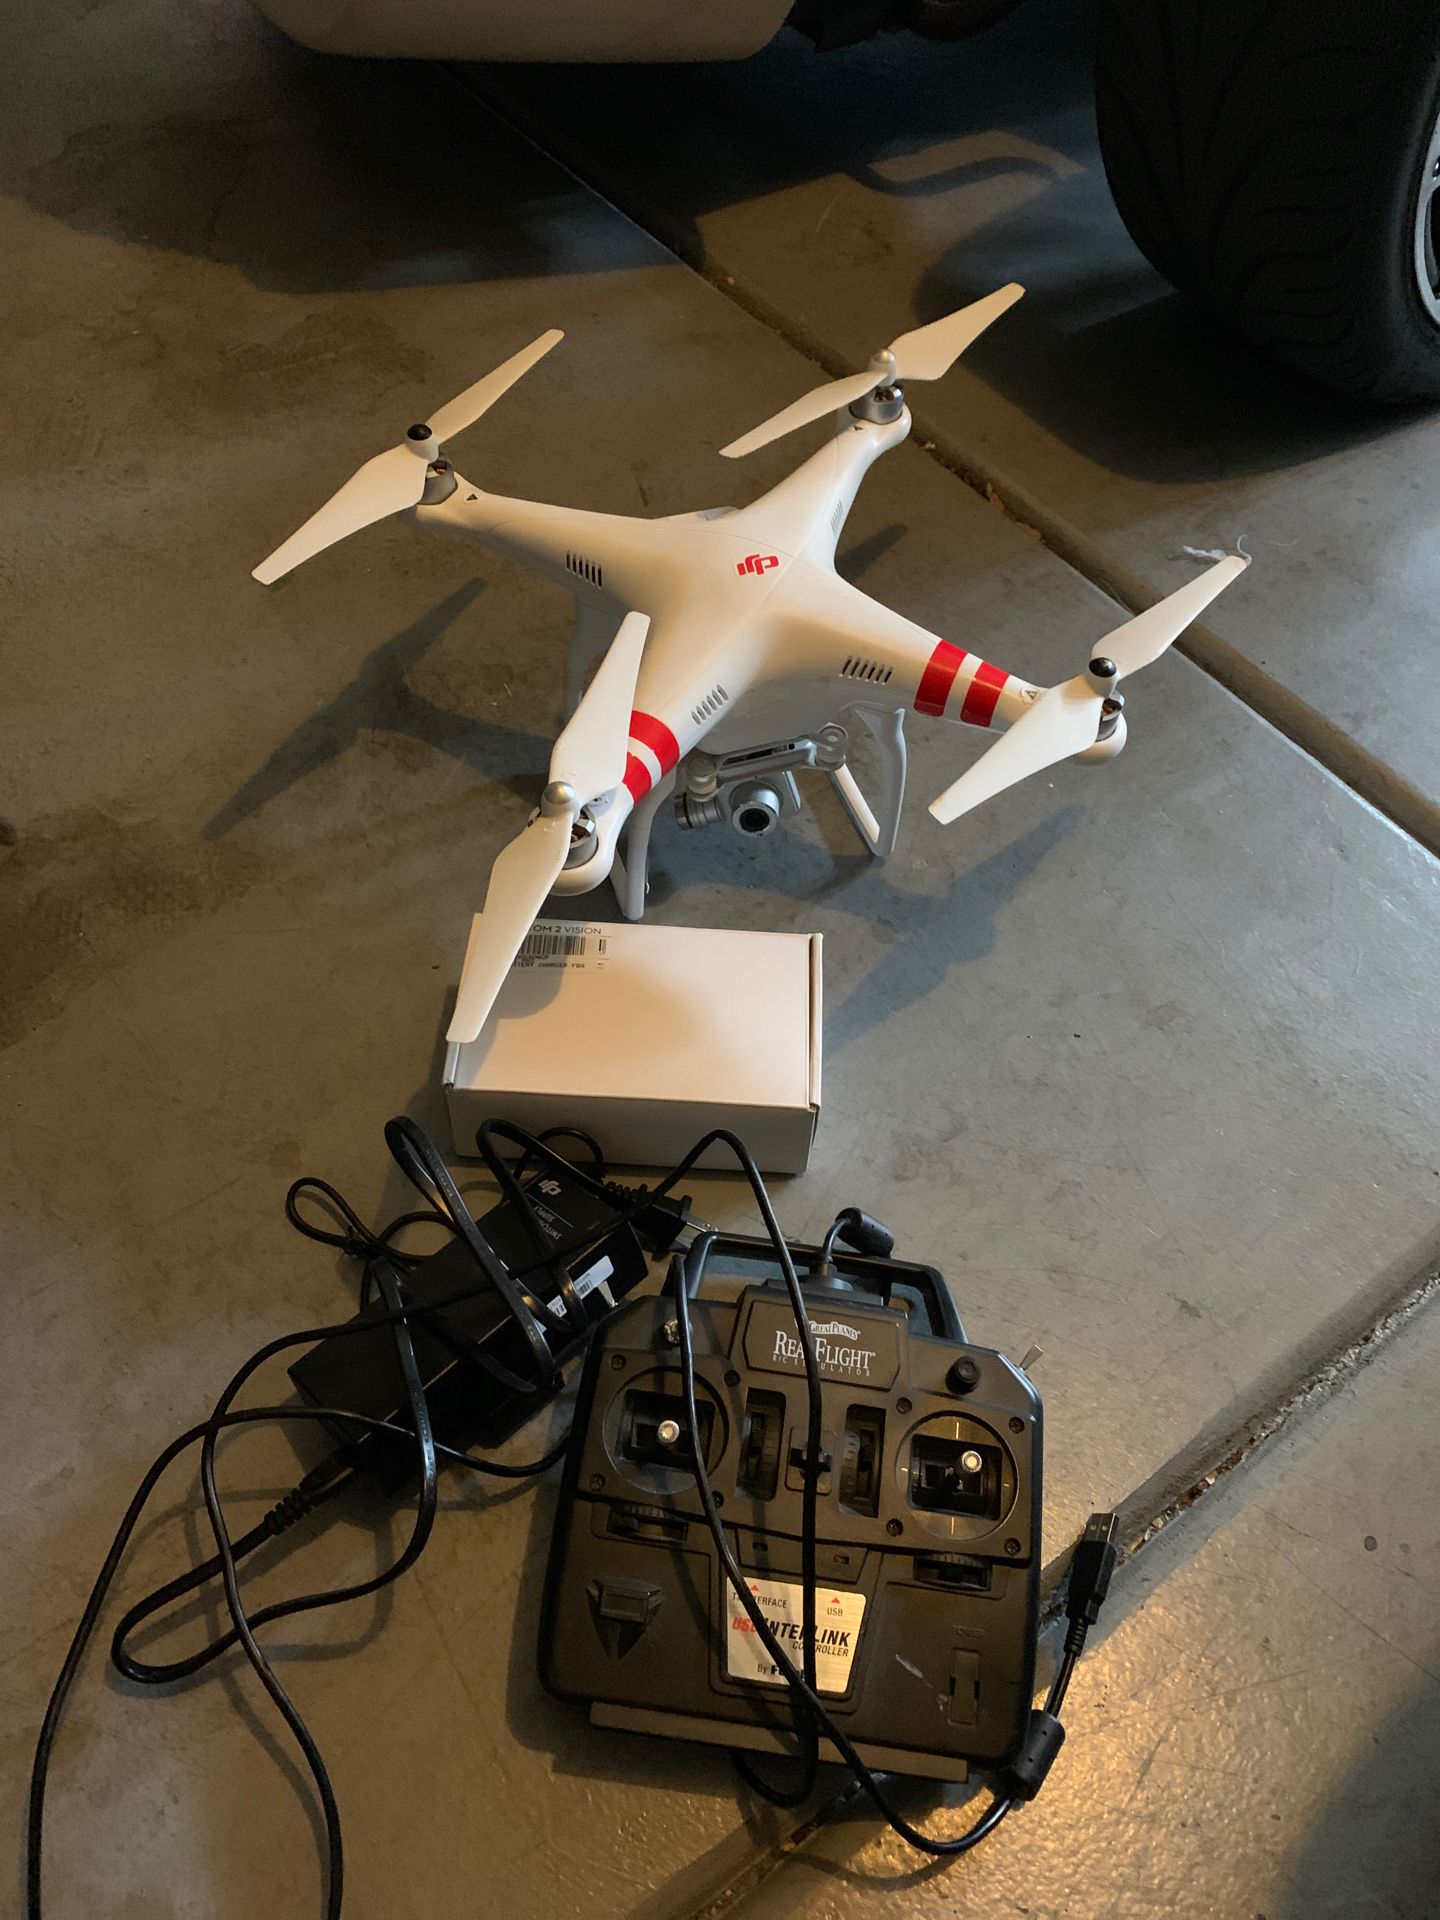 Phantom 2 vision drone with controller and battery charger